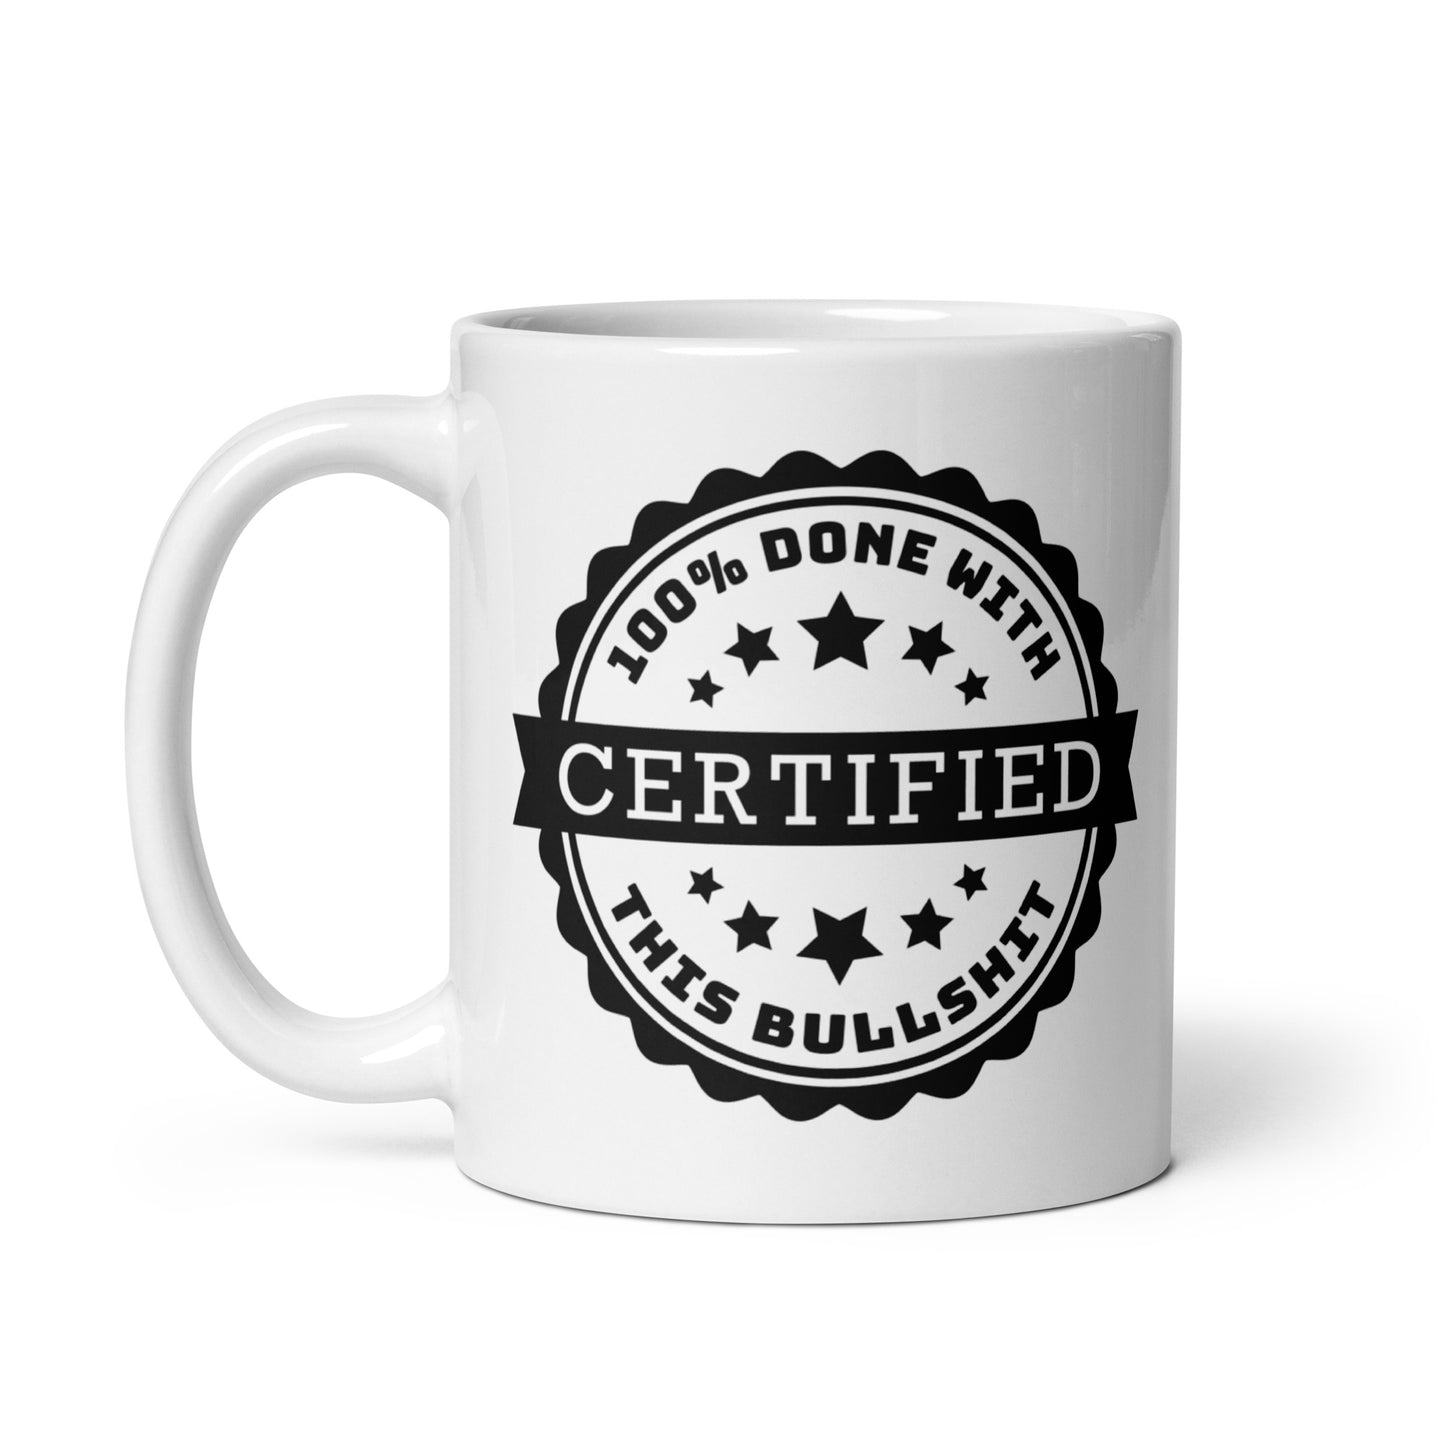 A white 11 oz ceramic coffee mug featuring an official-looking stamp that reads "Certified 100% Done with this bullshit"